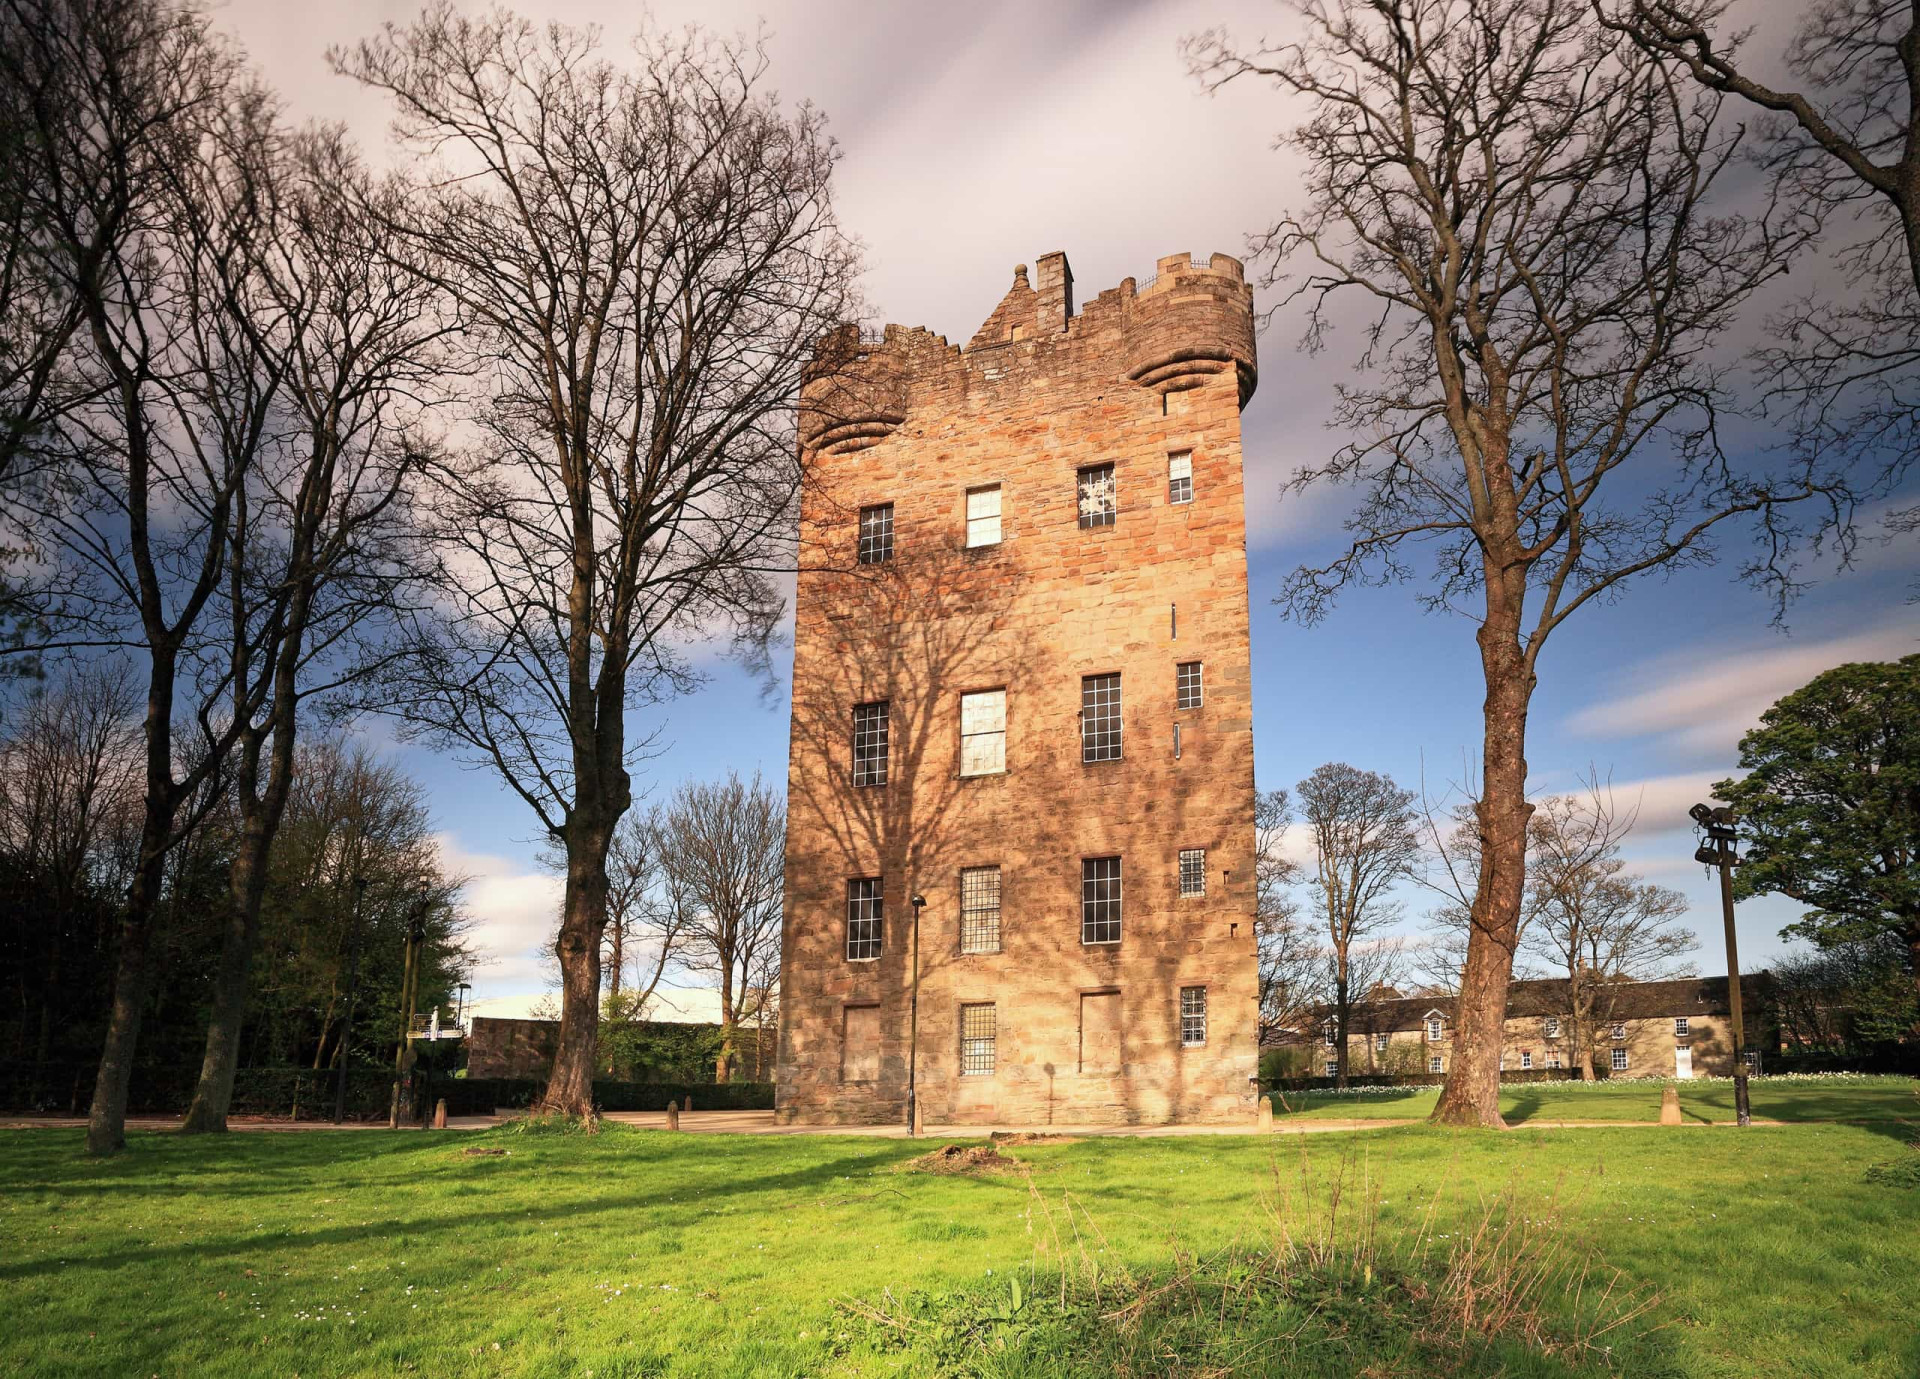 <p>Ghosts have been spotted in several rooms at the tower in Clackmannanshire, central Scotland, the most haunting apparition being the appearance of a man in chains in the tower dungeon.</p><p>You may also like:<a href="https://www.starsinsider.com/n/183899?utm_source=msn.com&utm_medium=display&utm_campaign=referral_description&utm_content=479726v1en-ca"> The most expensive Oscar dresses of all time</a></p>